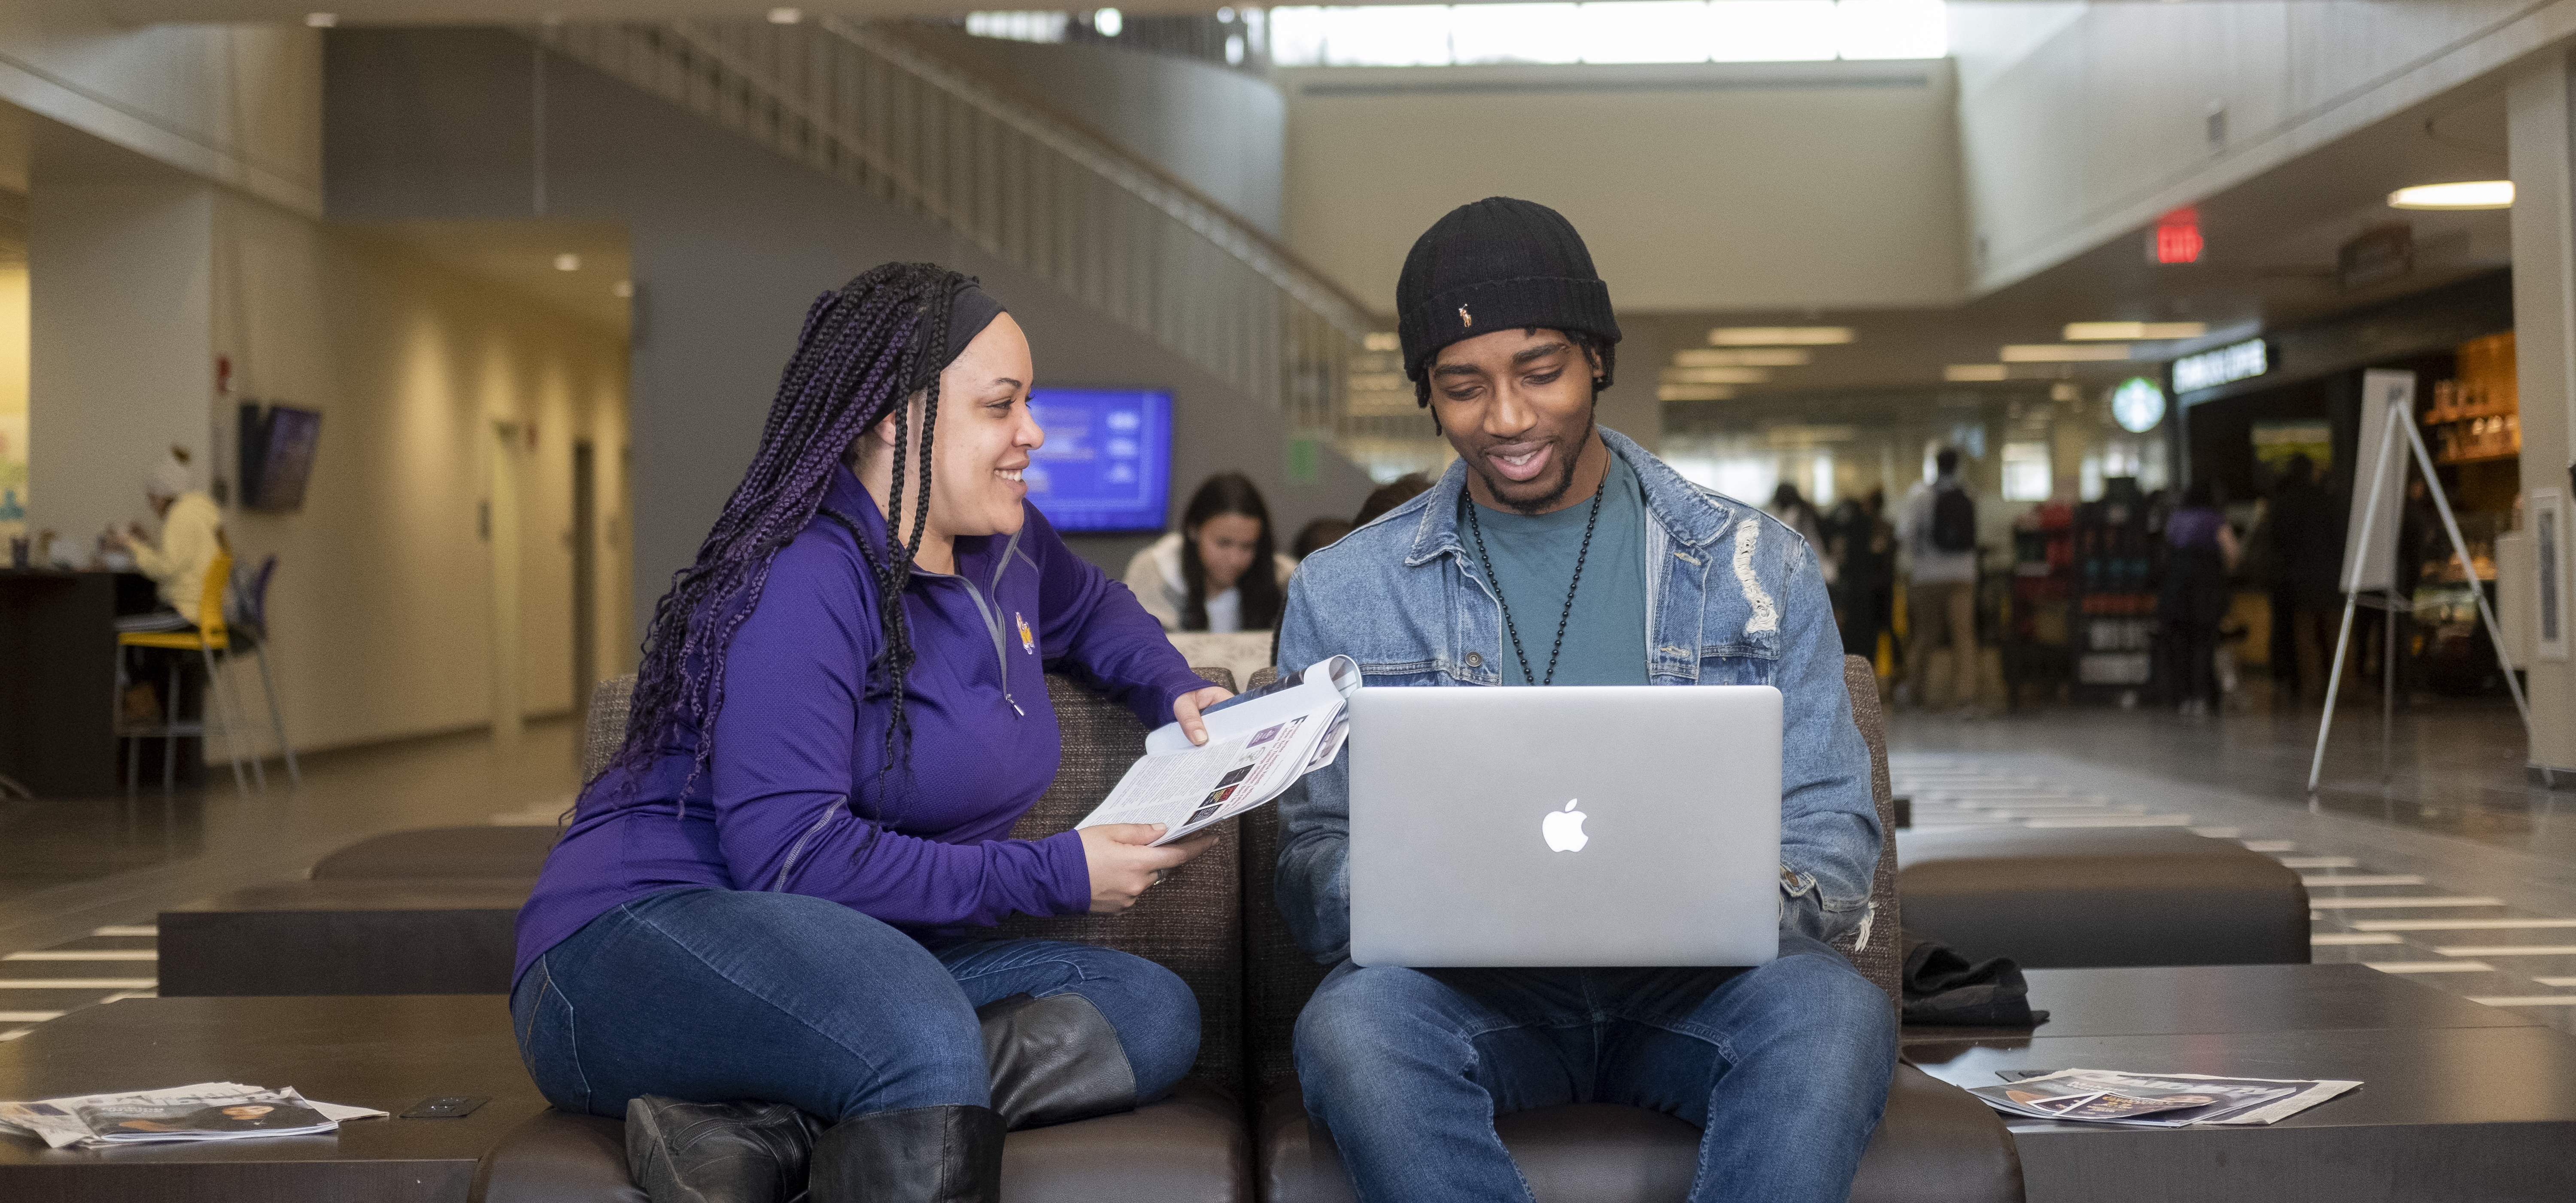 Two smiling students sit in Campus Center holding a laptop and some papers.